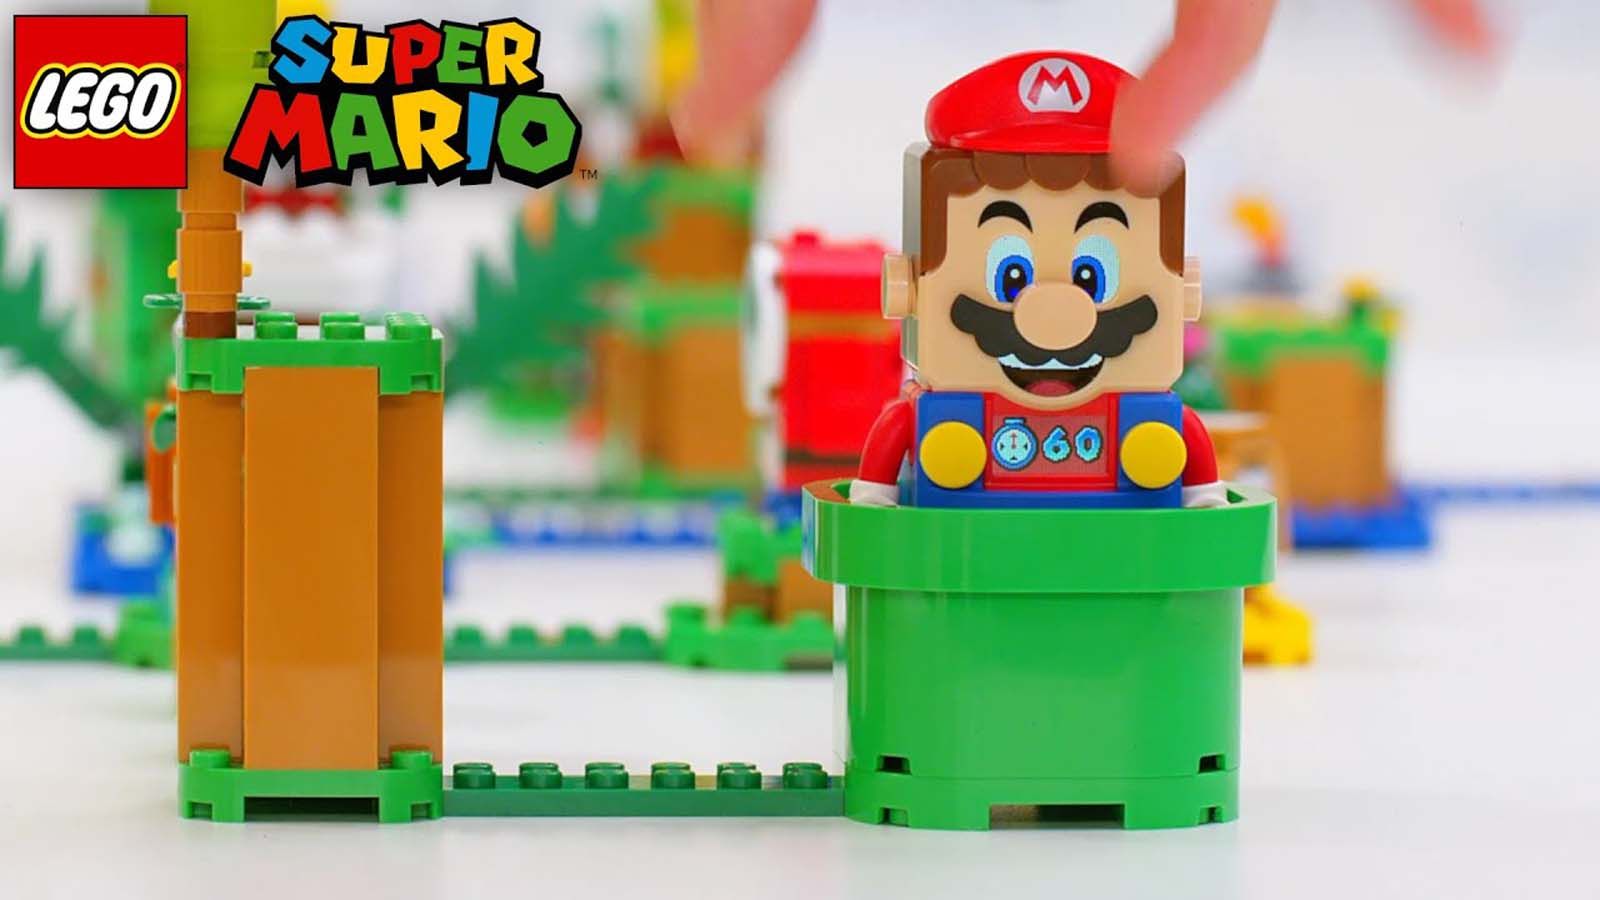 The LEGO Group and Nintendo lift the lid on exciting new LEGO Super Mario details; preorders begin today